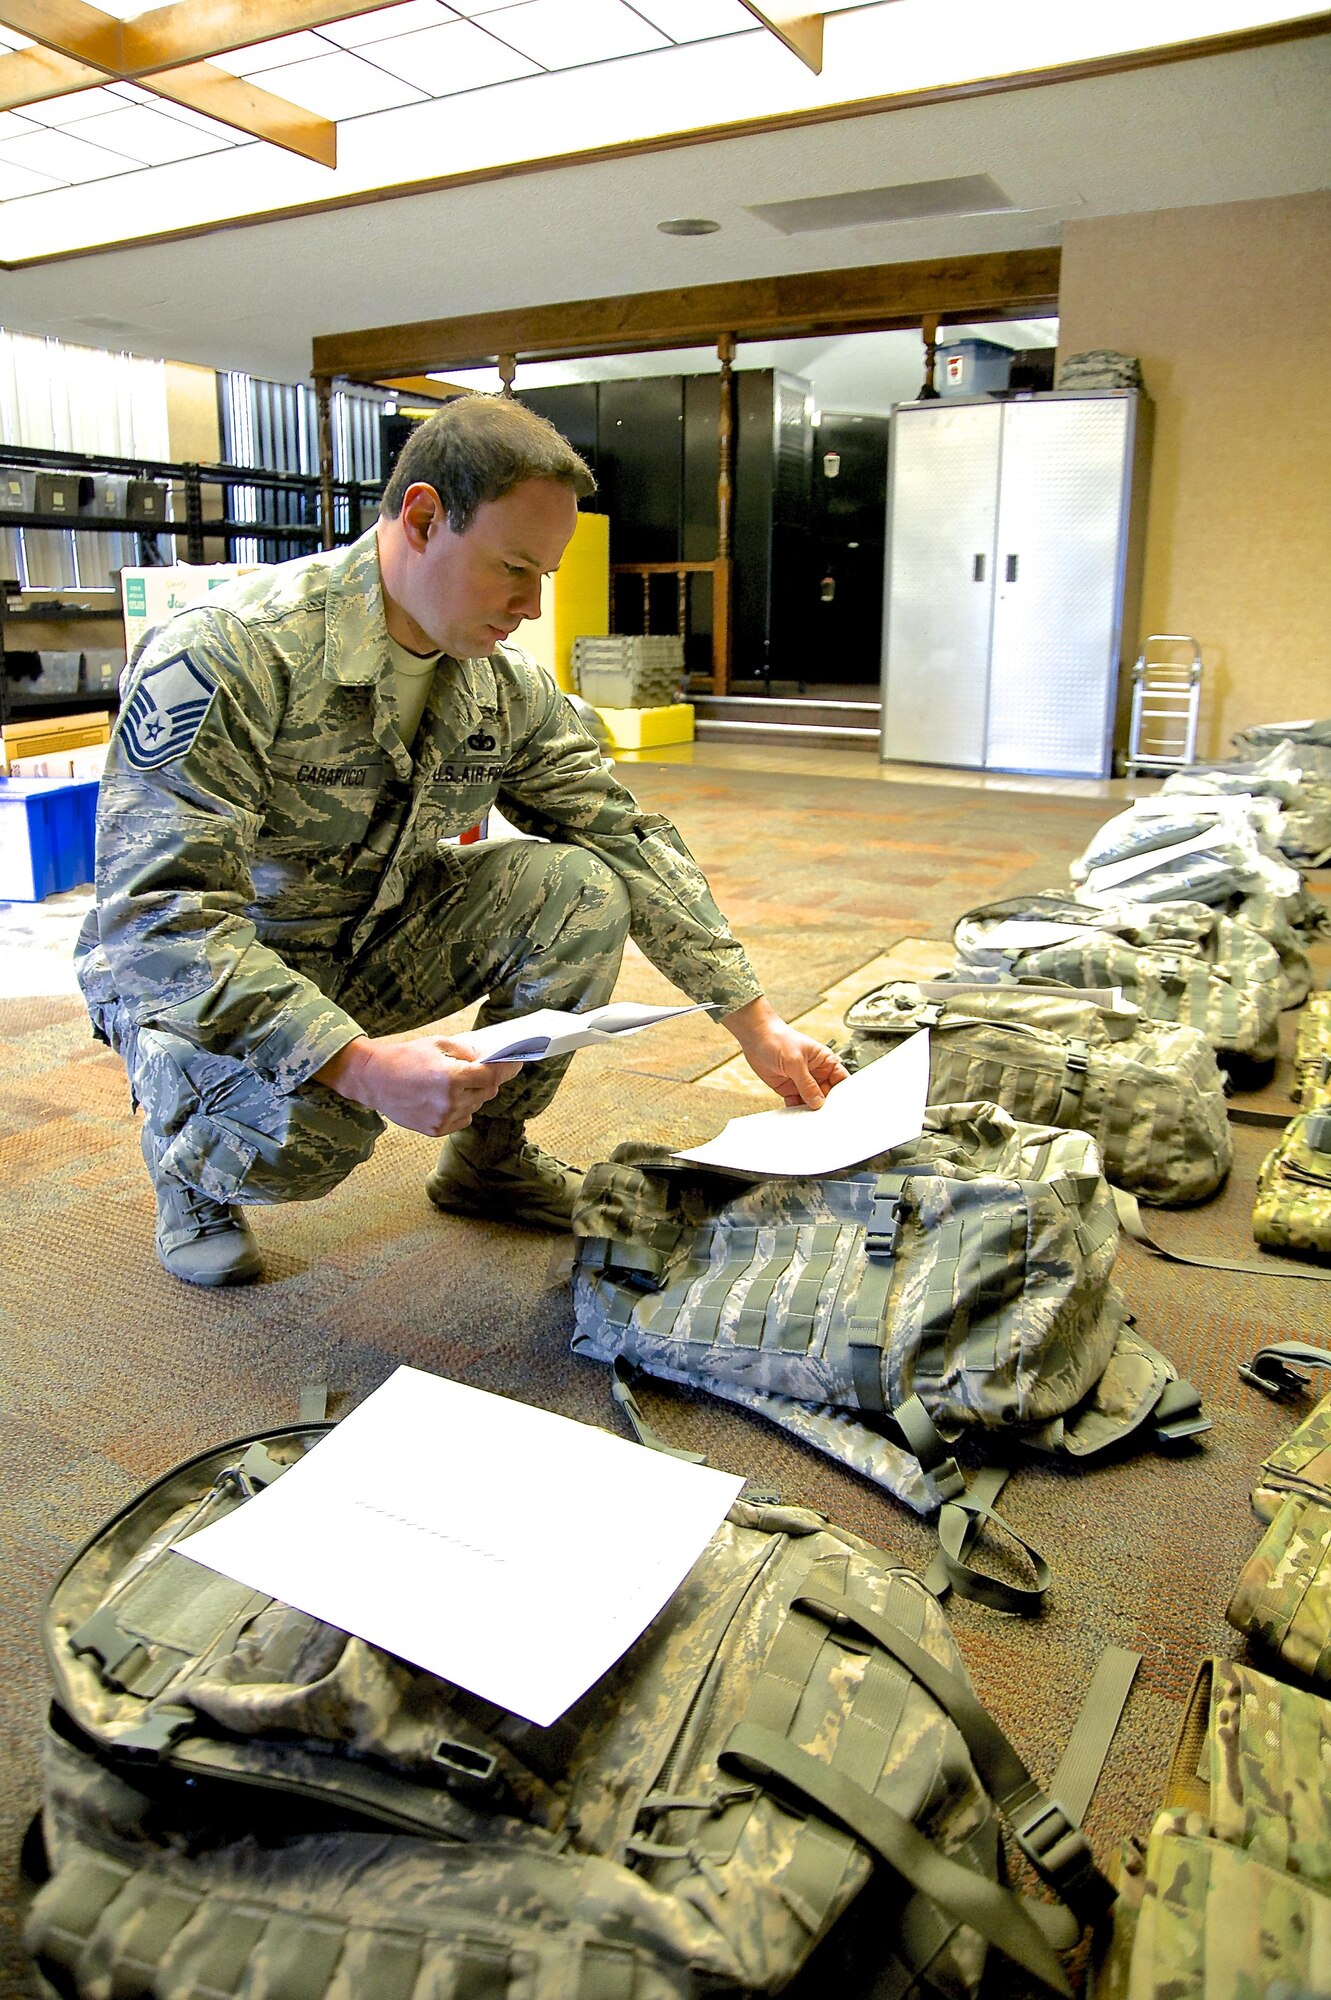 Master Sgt. Paul Carapucci, 926th Security Forces Squadron noncommissioned officer in charge of supply, checks equipment against a list for a training pack used by 926th SFS Airmen. Carapucci was recently named Air Force Reserve Command’s Outstanding Security Forces Air Reserve Component Noncommissioned Officer of 2016. (U.S. Air Force photo by Senior Airman Alexandria Slade)